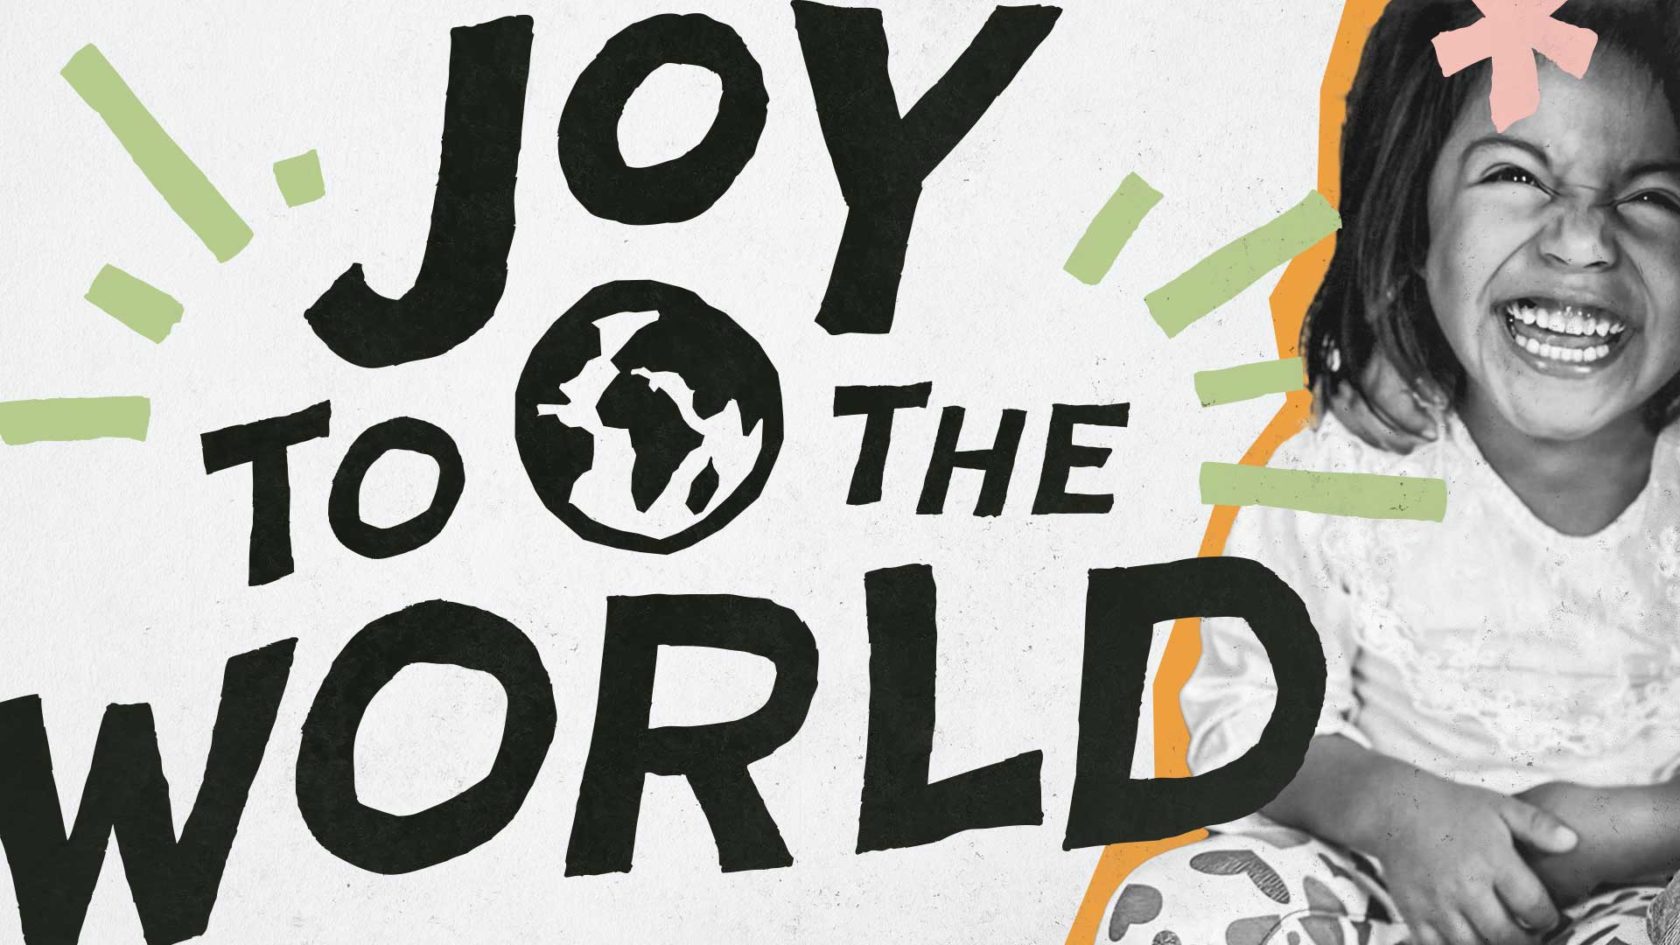 Bring JOY To the World in Unexpected Ways